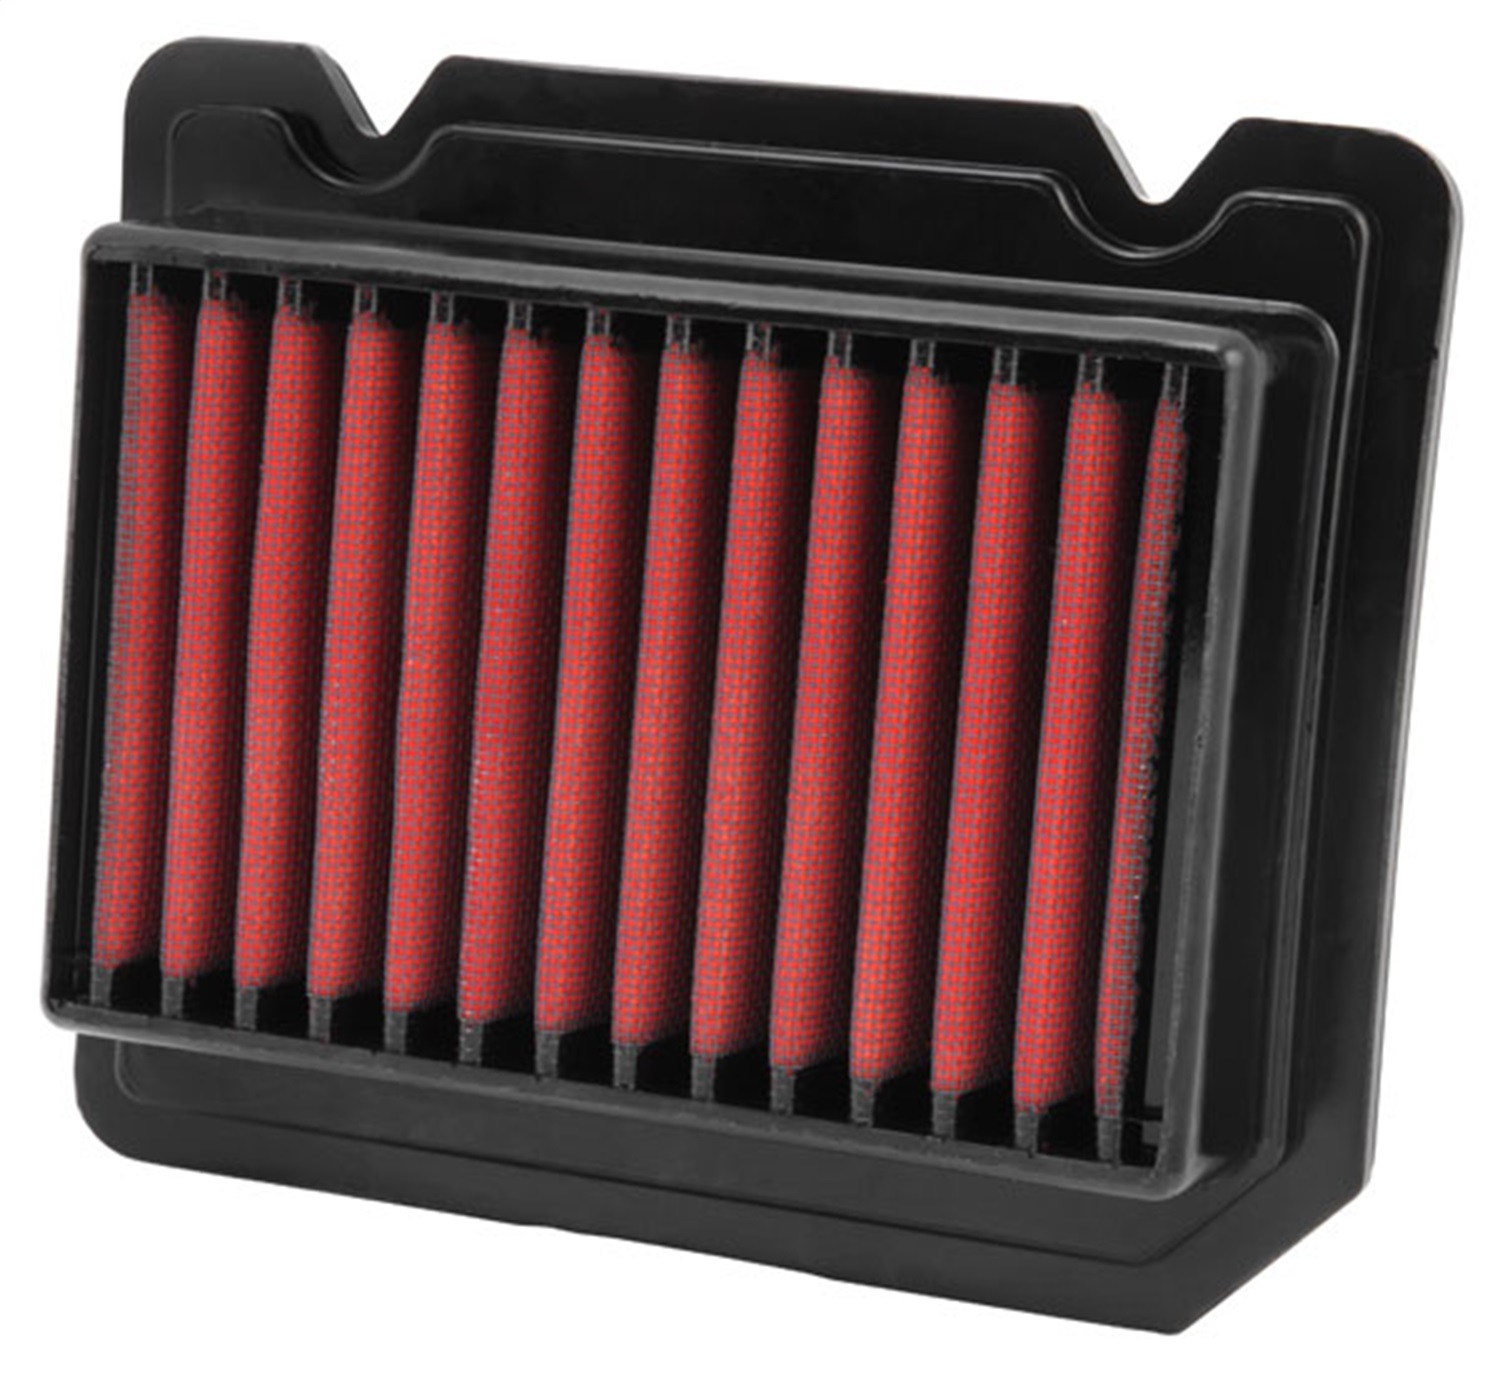 AEM Induction AEM Induction 28-20320 Dryflow Air Filter Fits 04-11 Aveo Aveo5 G3 Wave